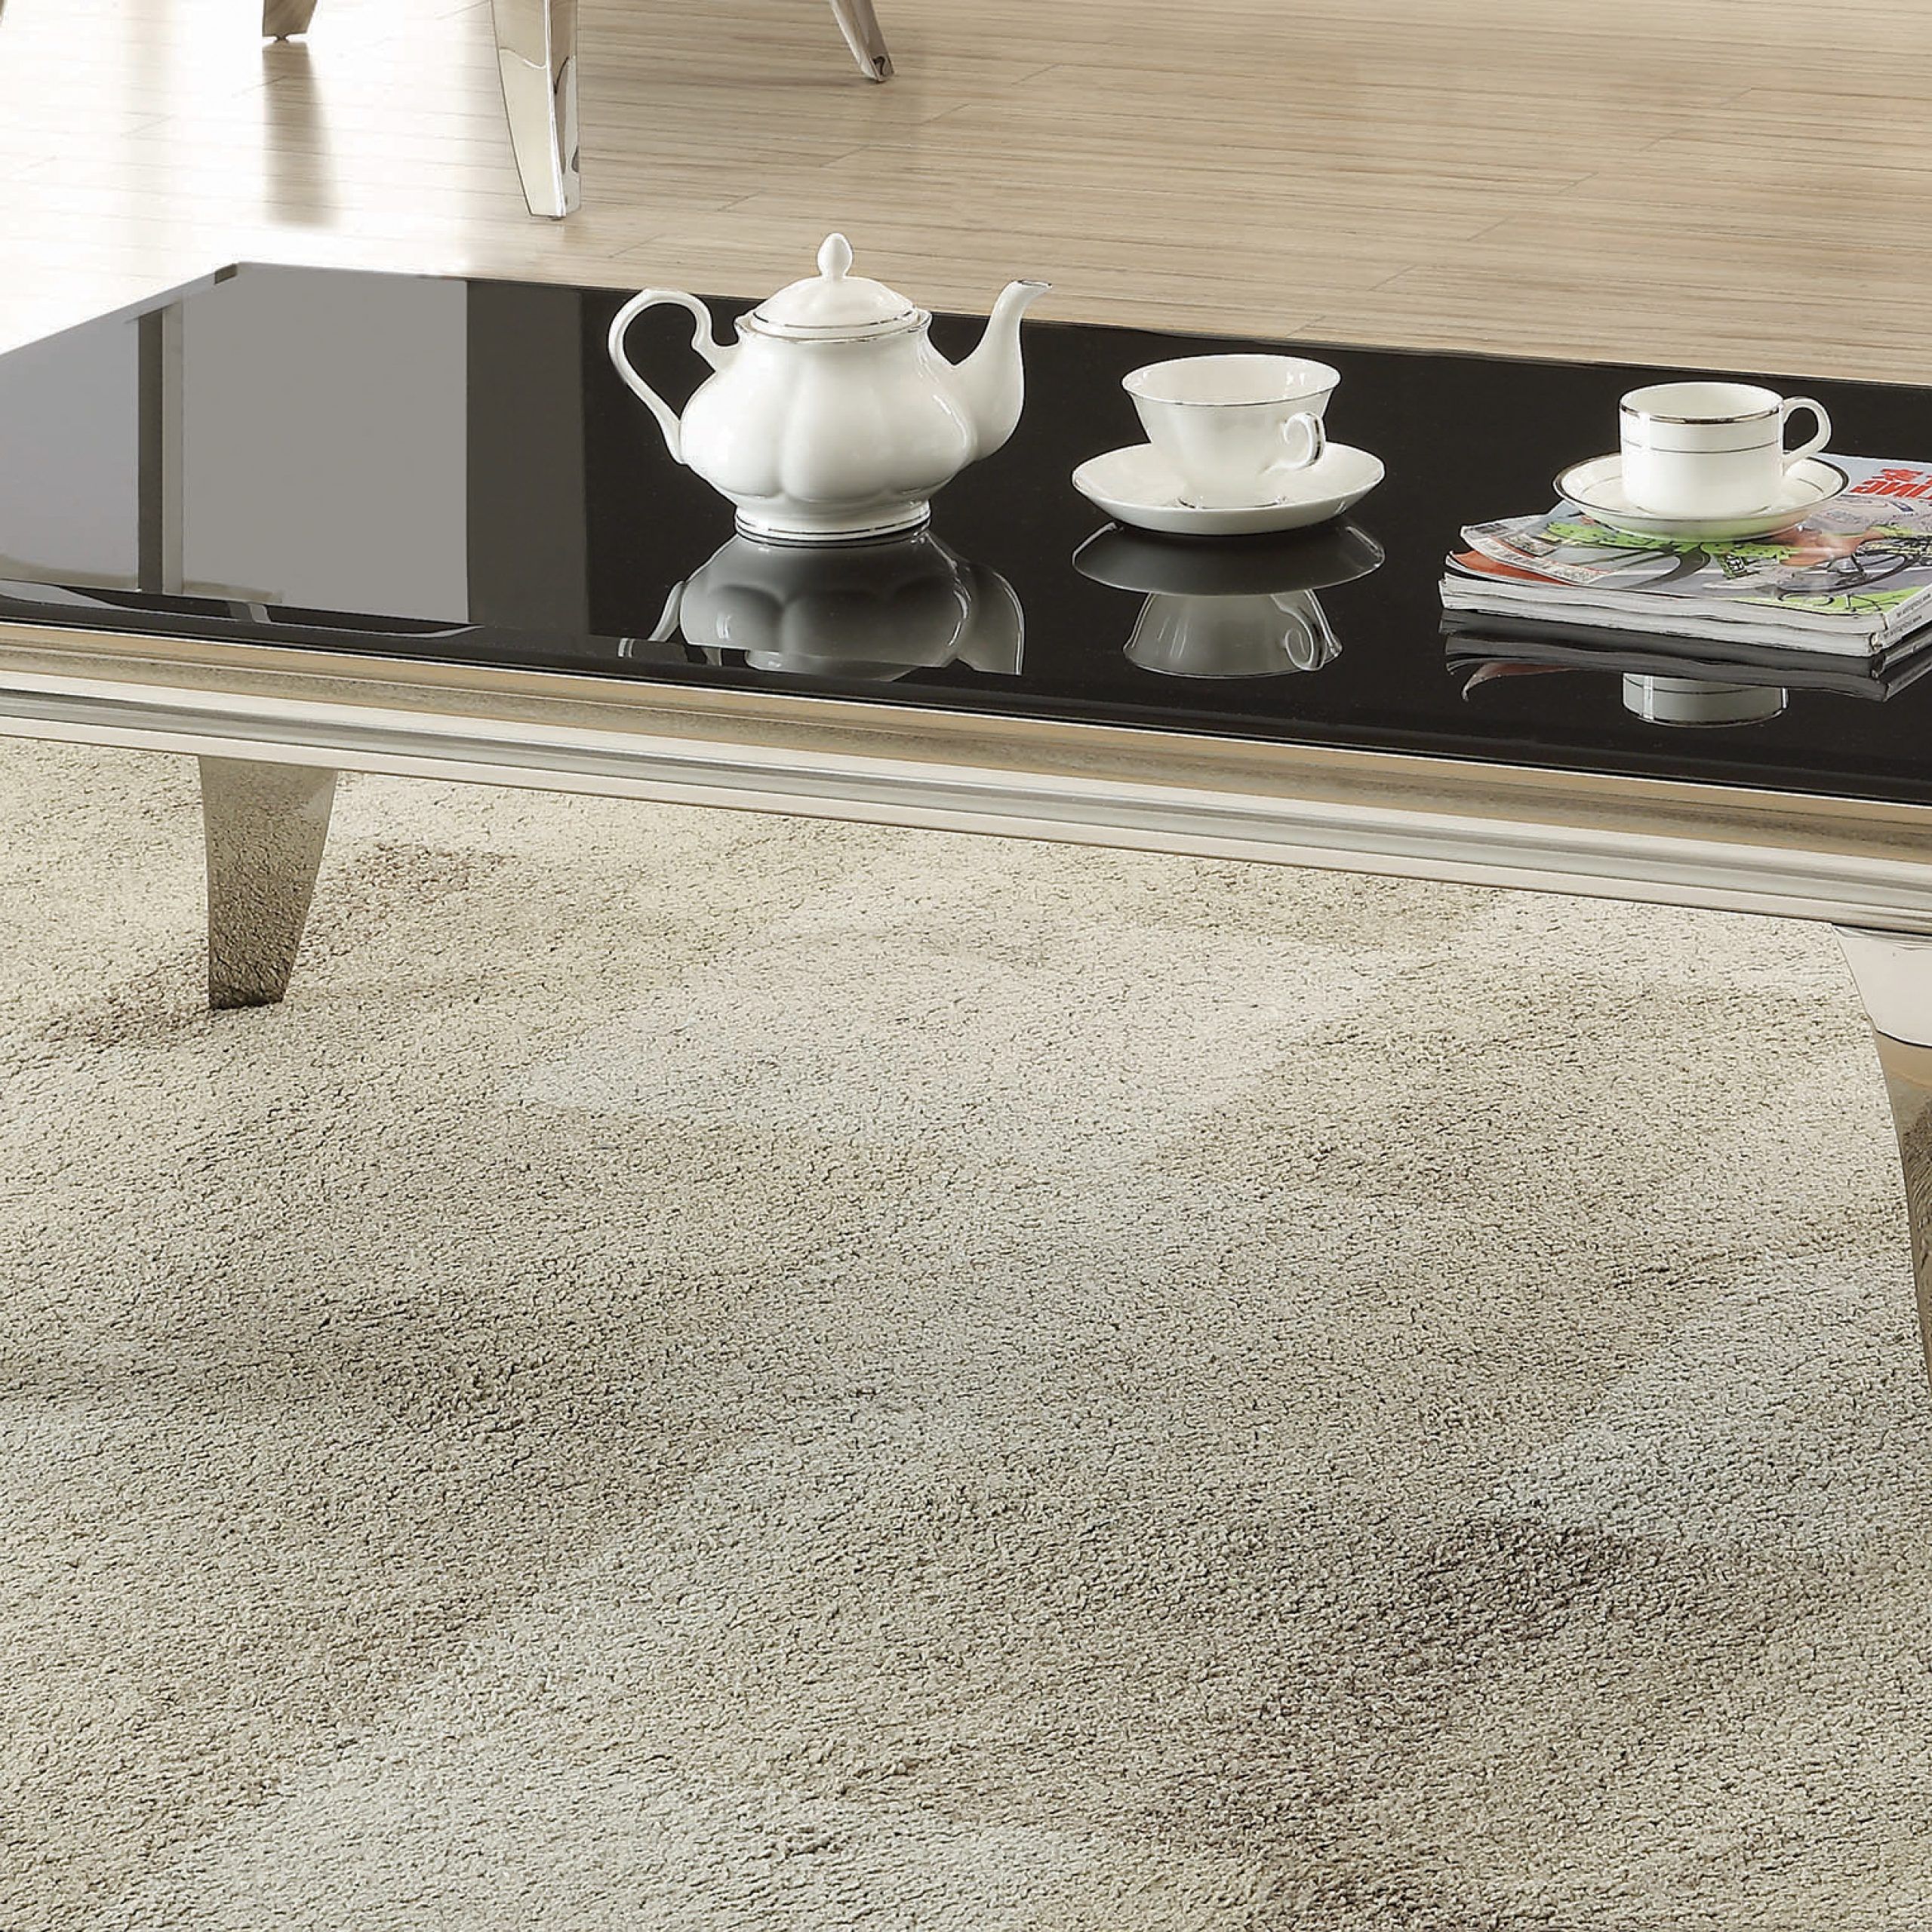 Most Current Rectangular Coffee Table Chrome And Black – Coaster Fine Fur With Regard To Chrome And Glass Rectangular Coffee Tables (View 7 of 10)